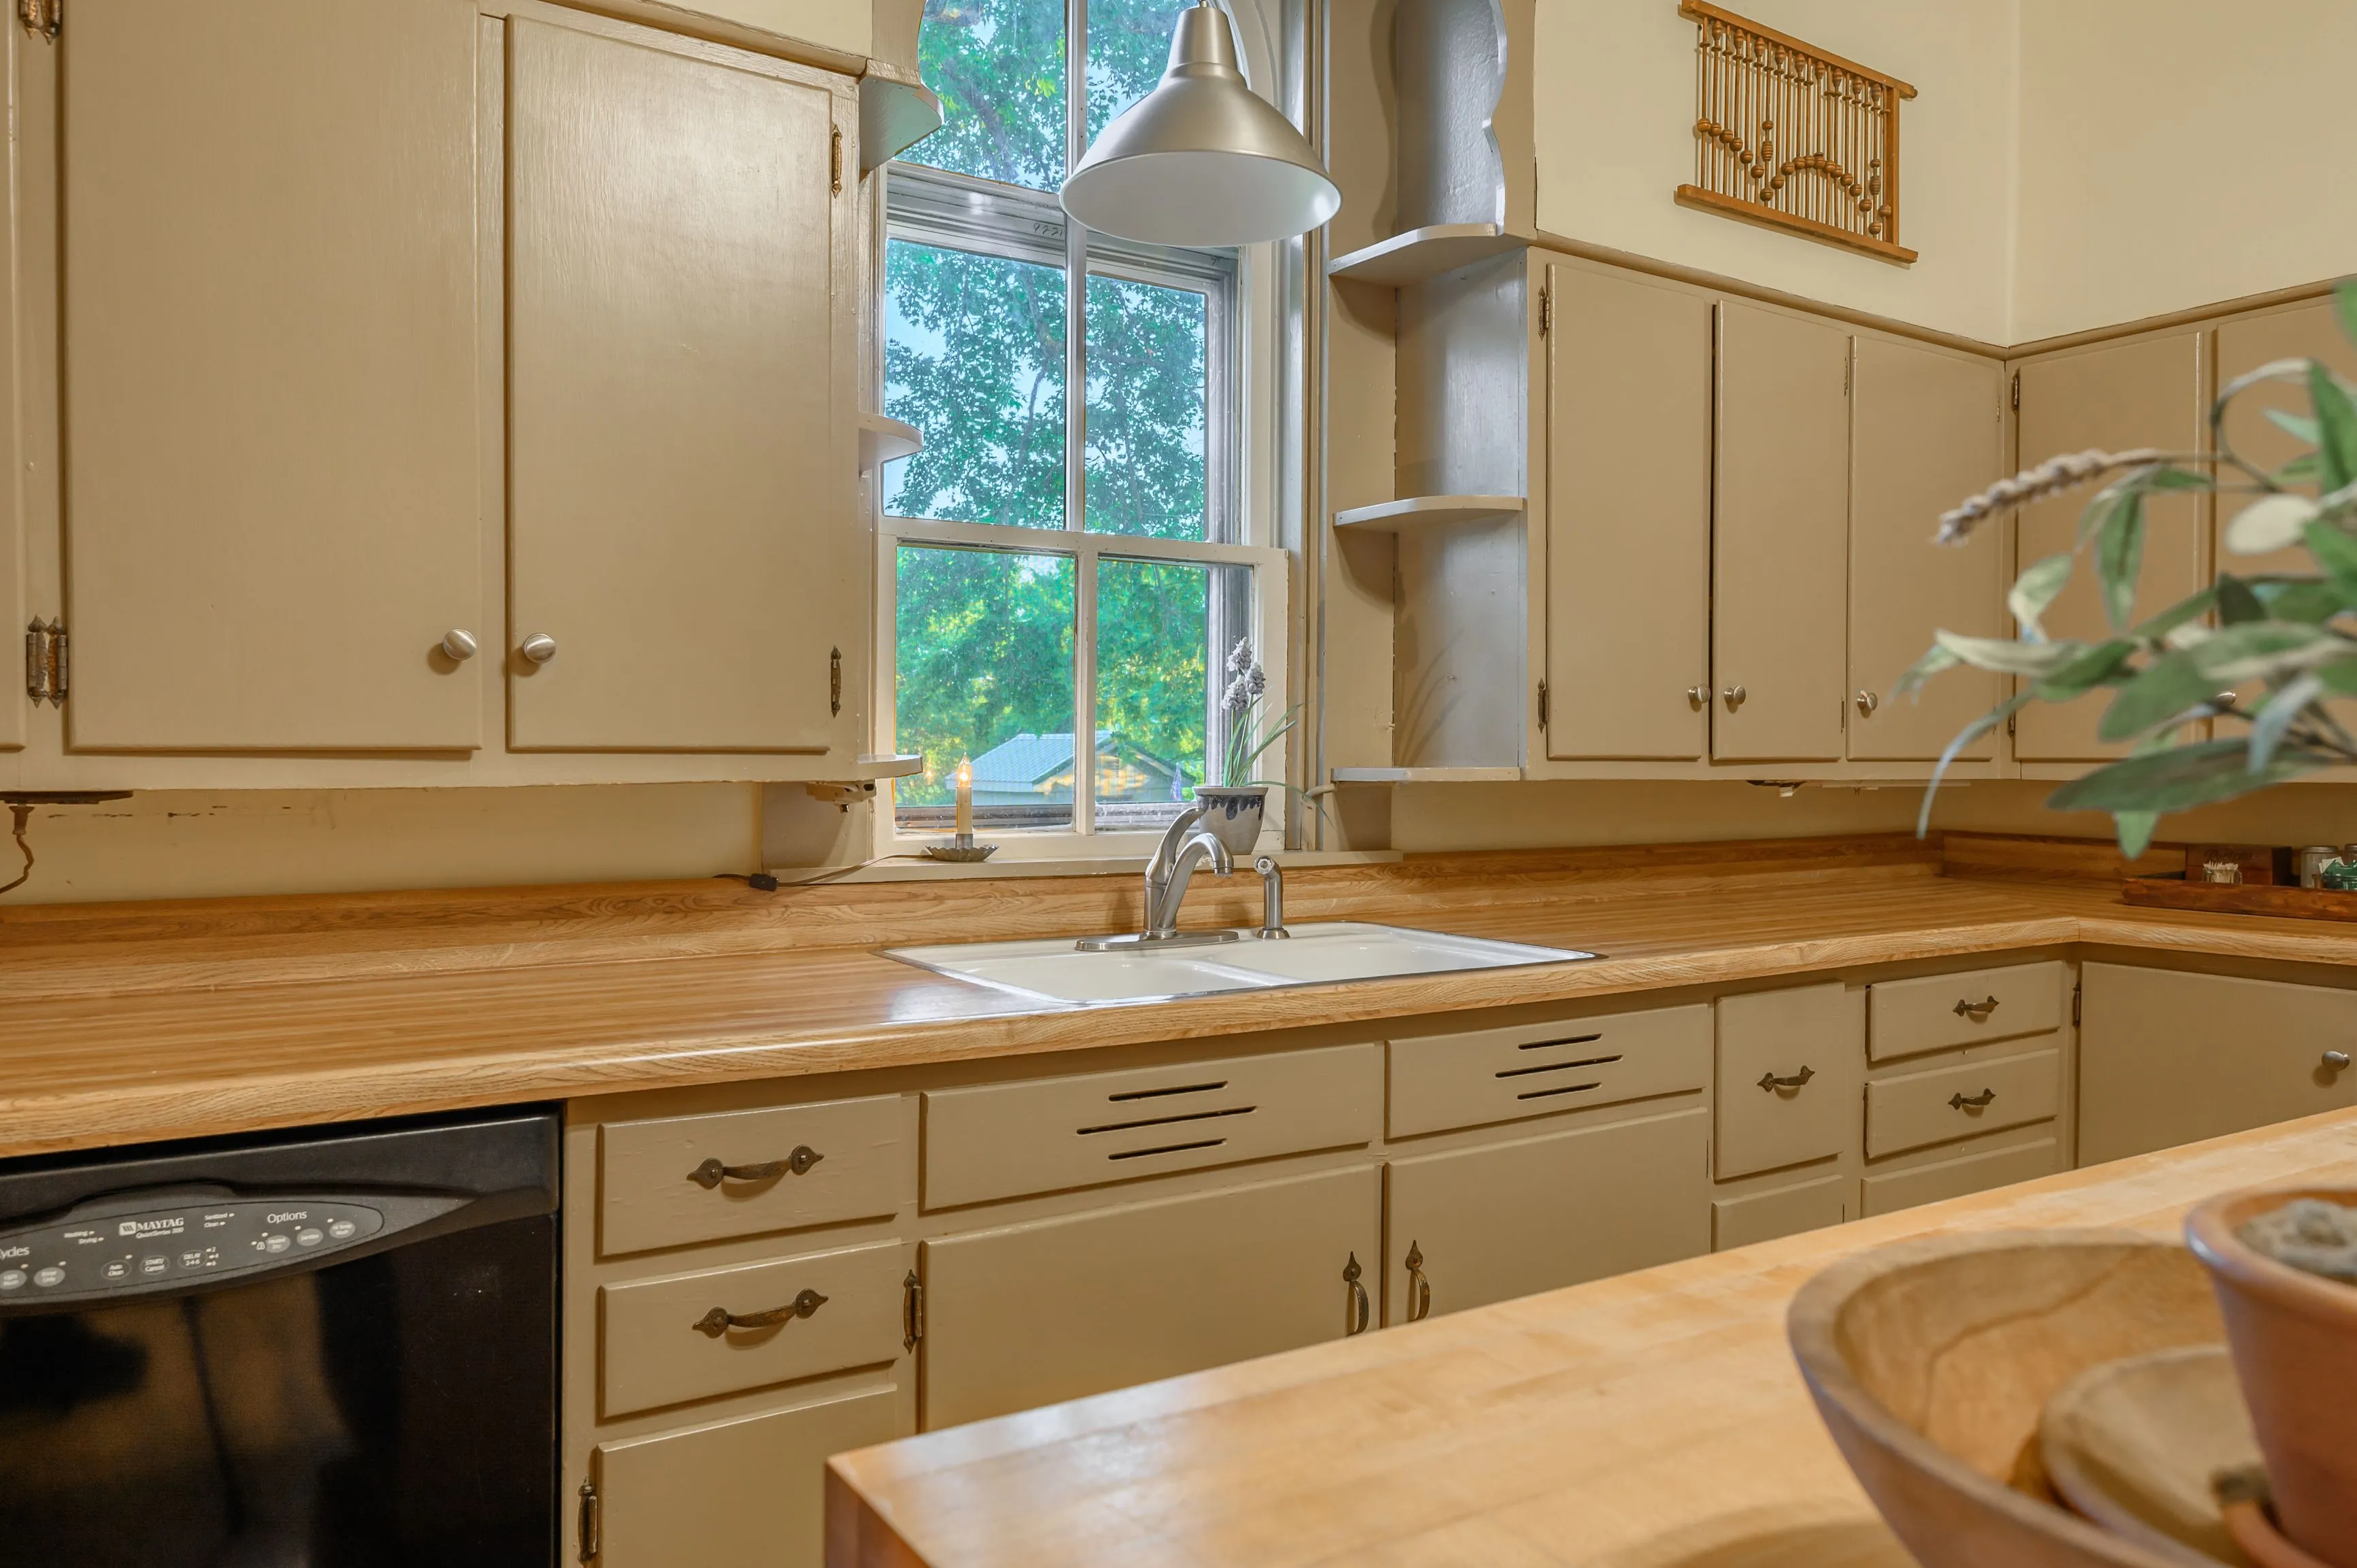 Cozy kitchen interior with wooden countertops, beige cabinets, a sink with a window above it, and greenery on the side.